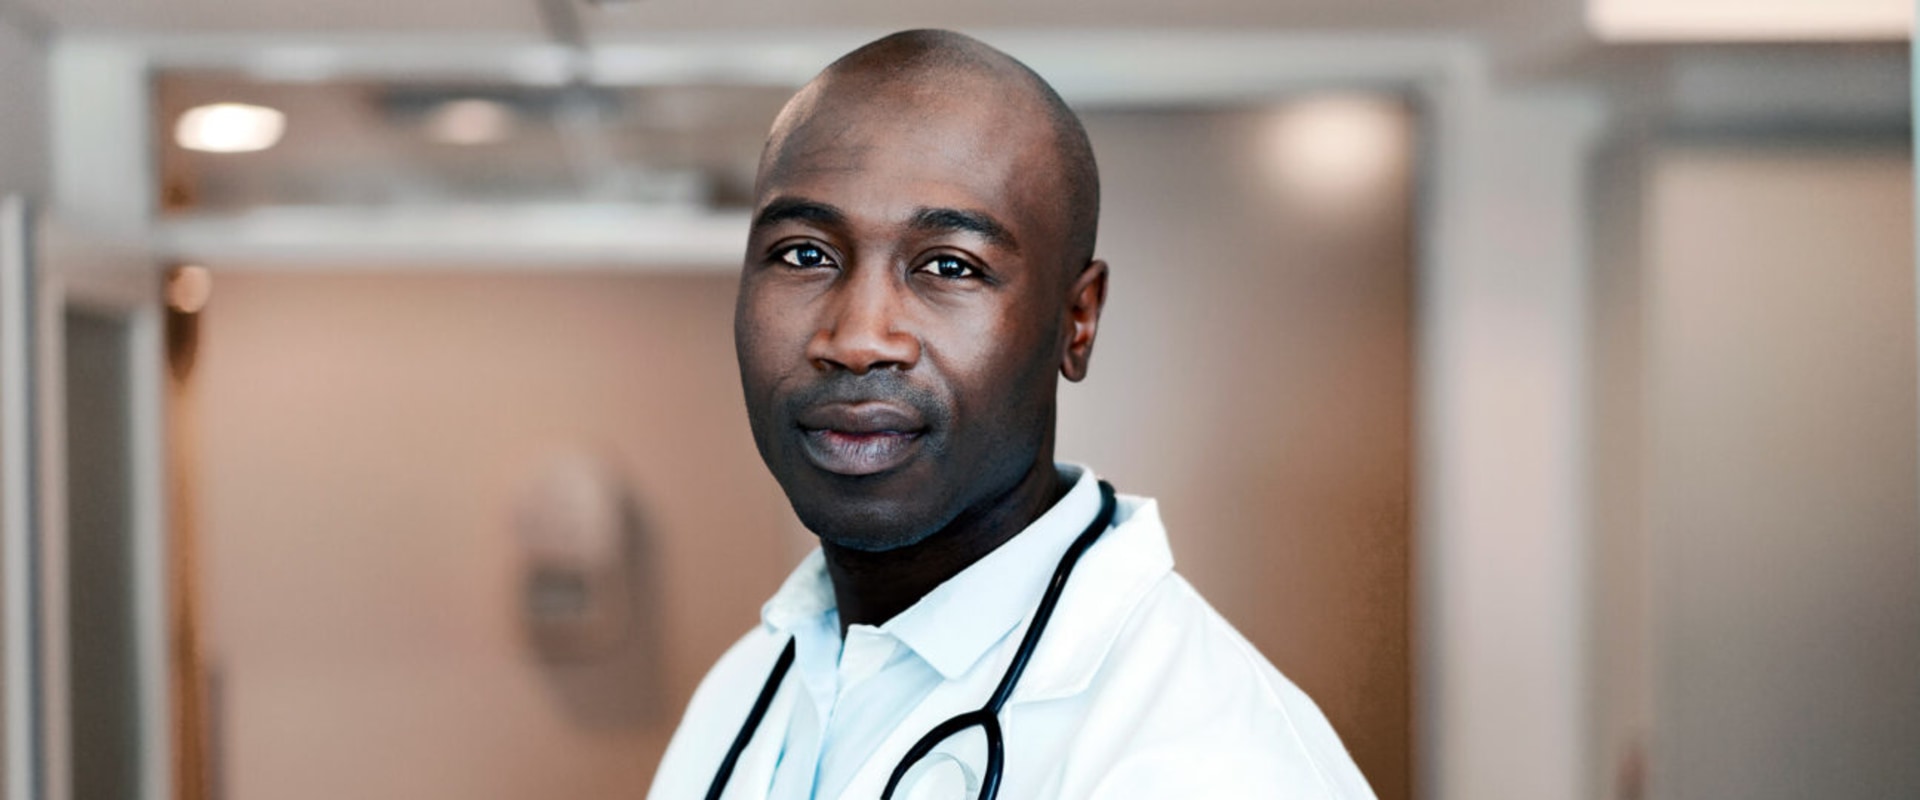 How Many Black Doctors Are There in the US?